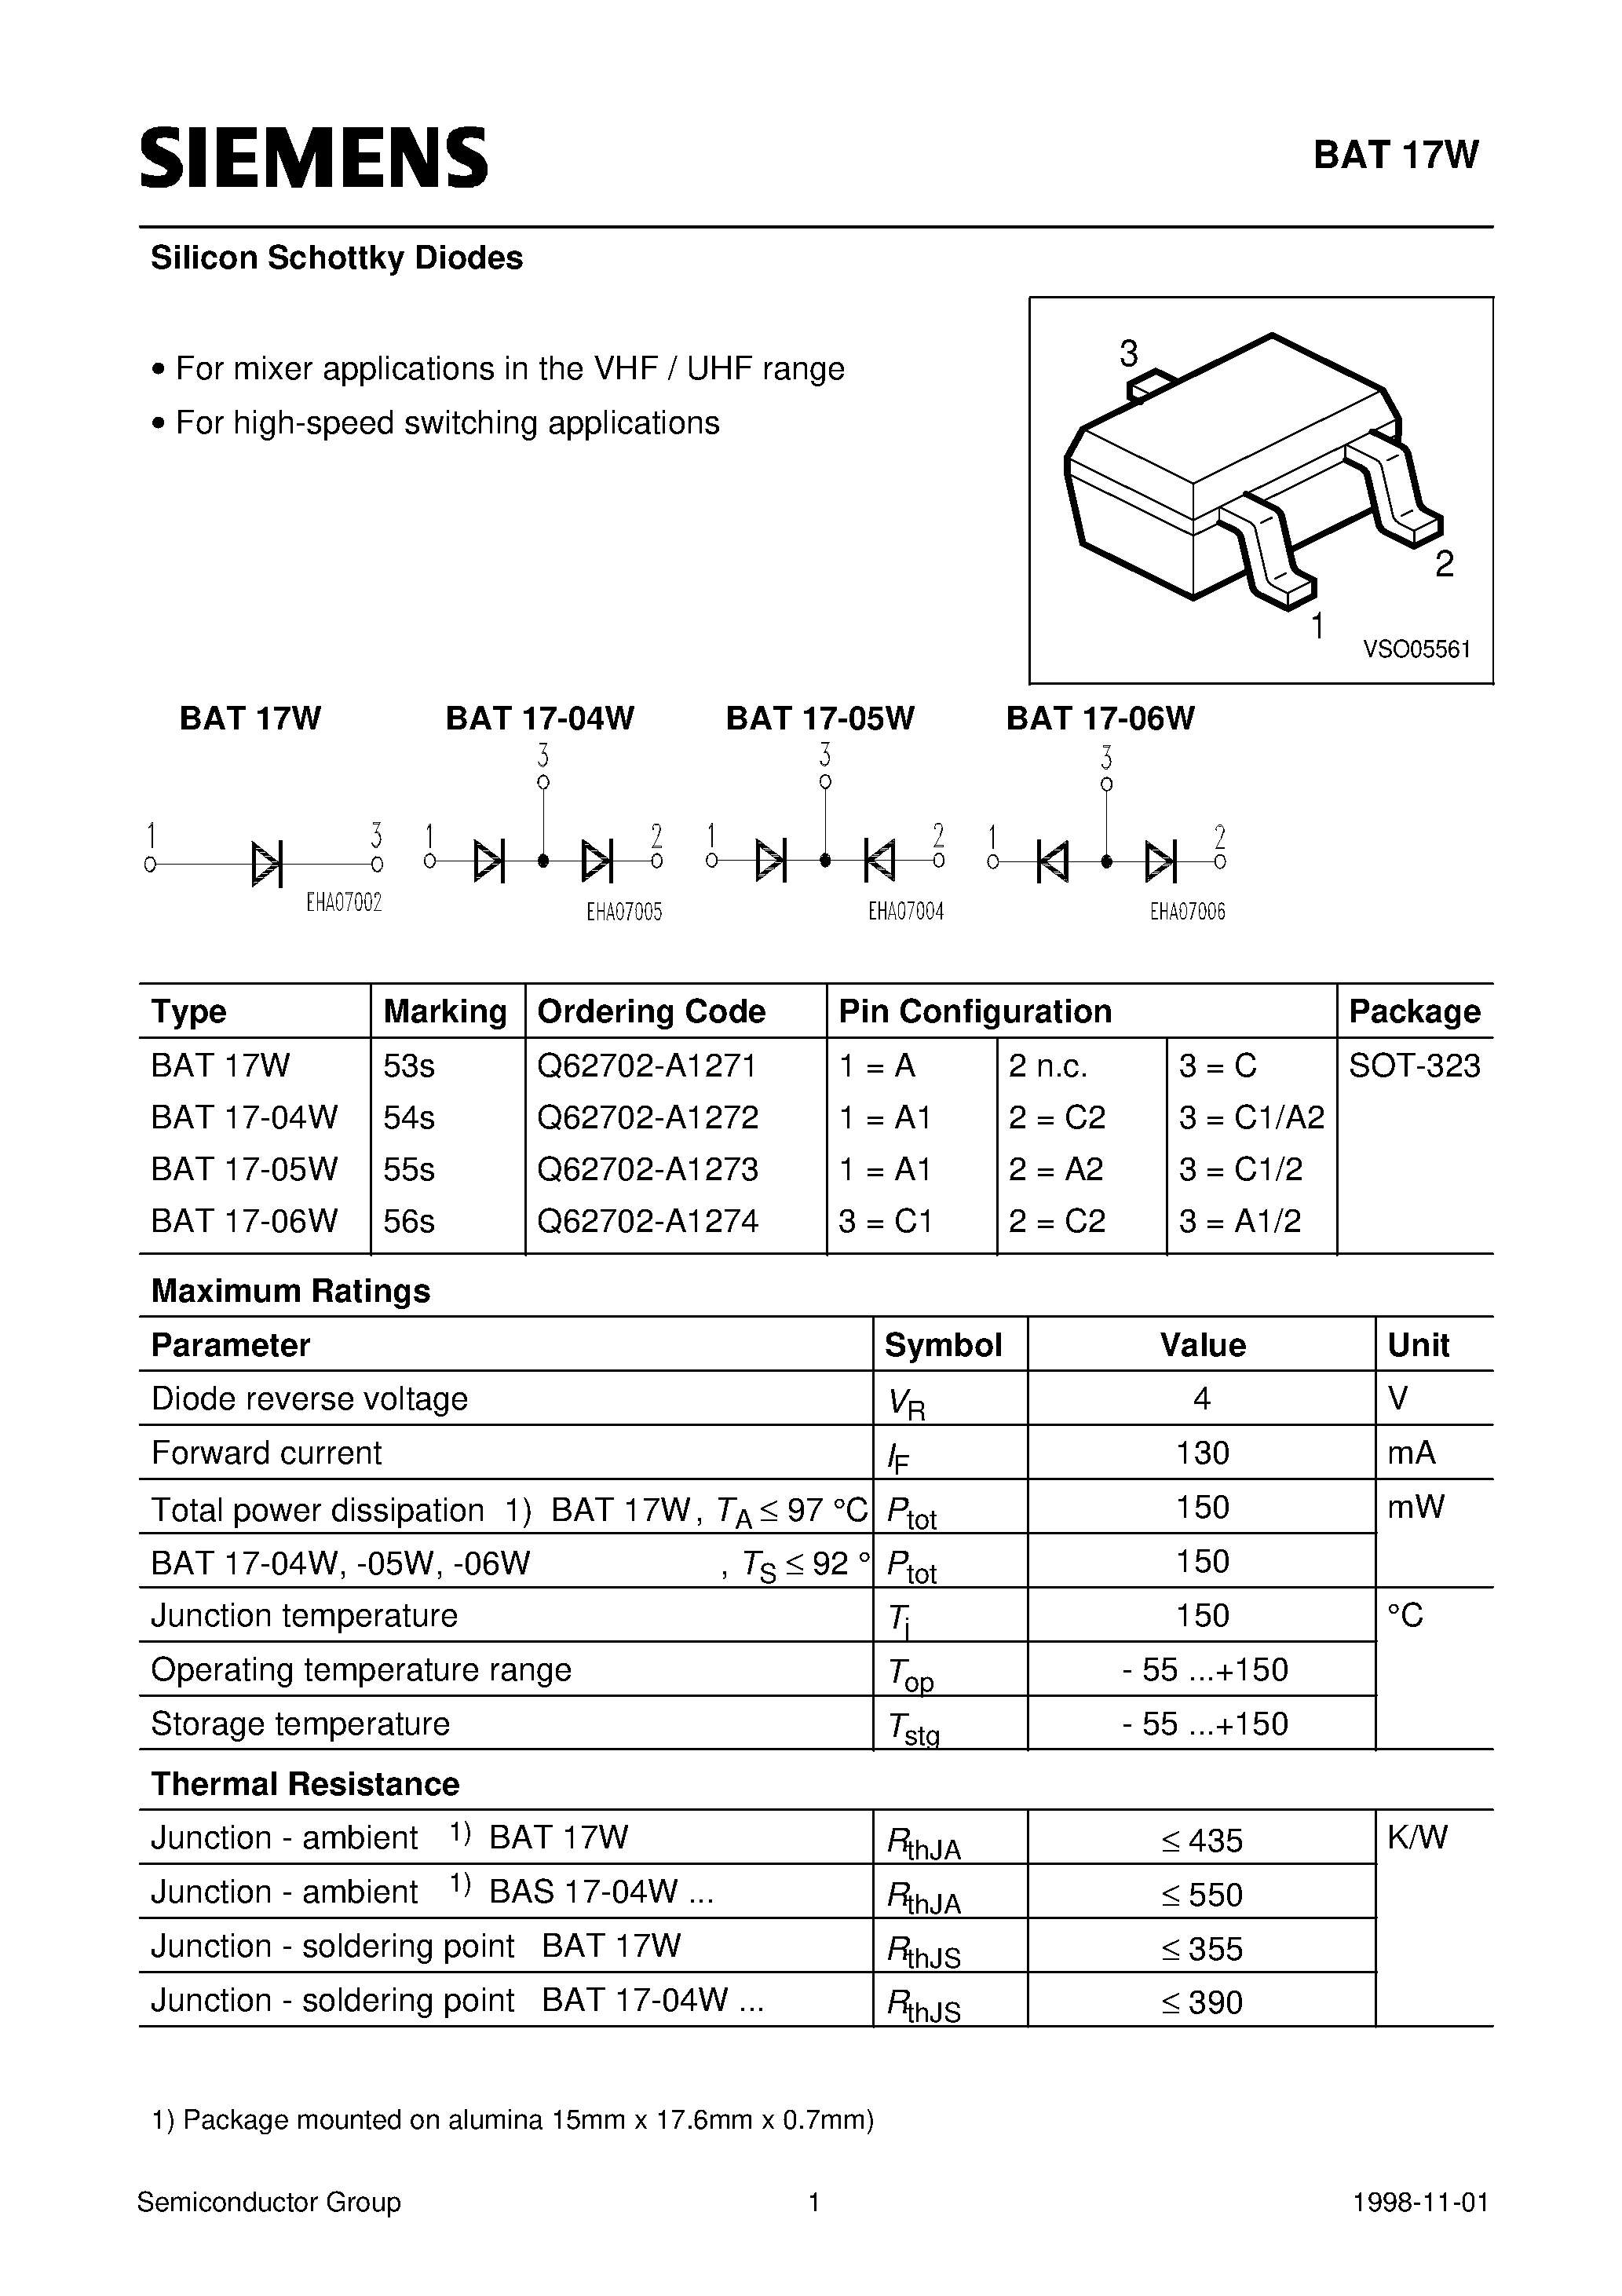 Datasheet BAT17-04W - Silicon Schottky Diodes (For mixer applications in the VHF / UHF range For high-speed switching applications) page 1